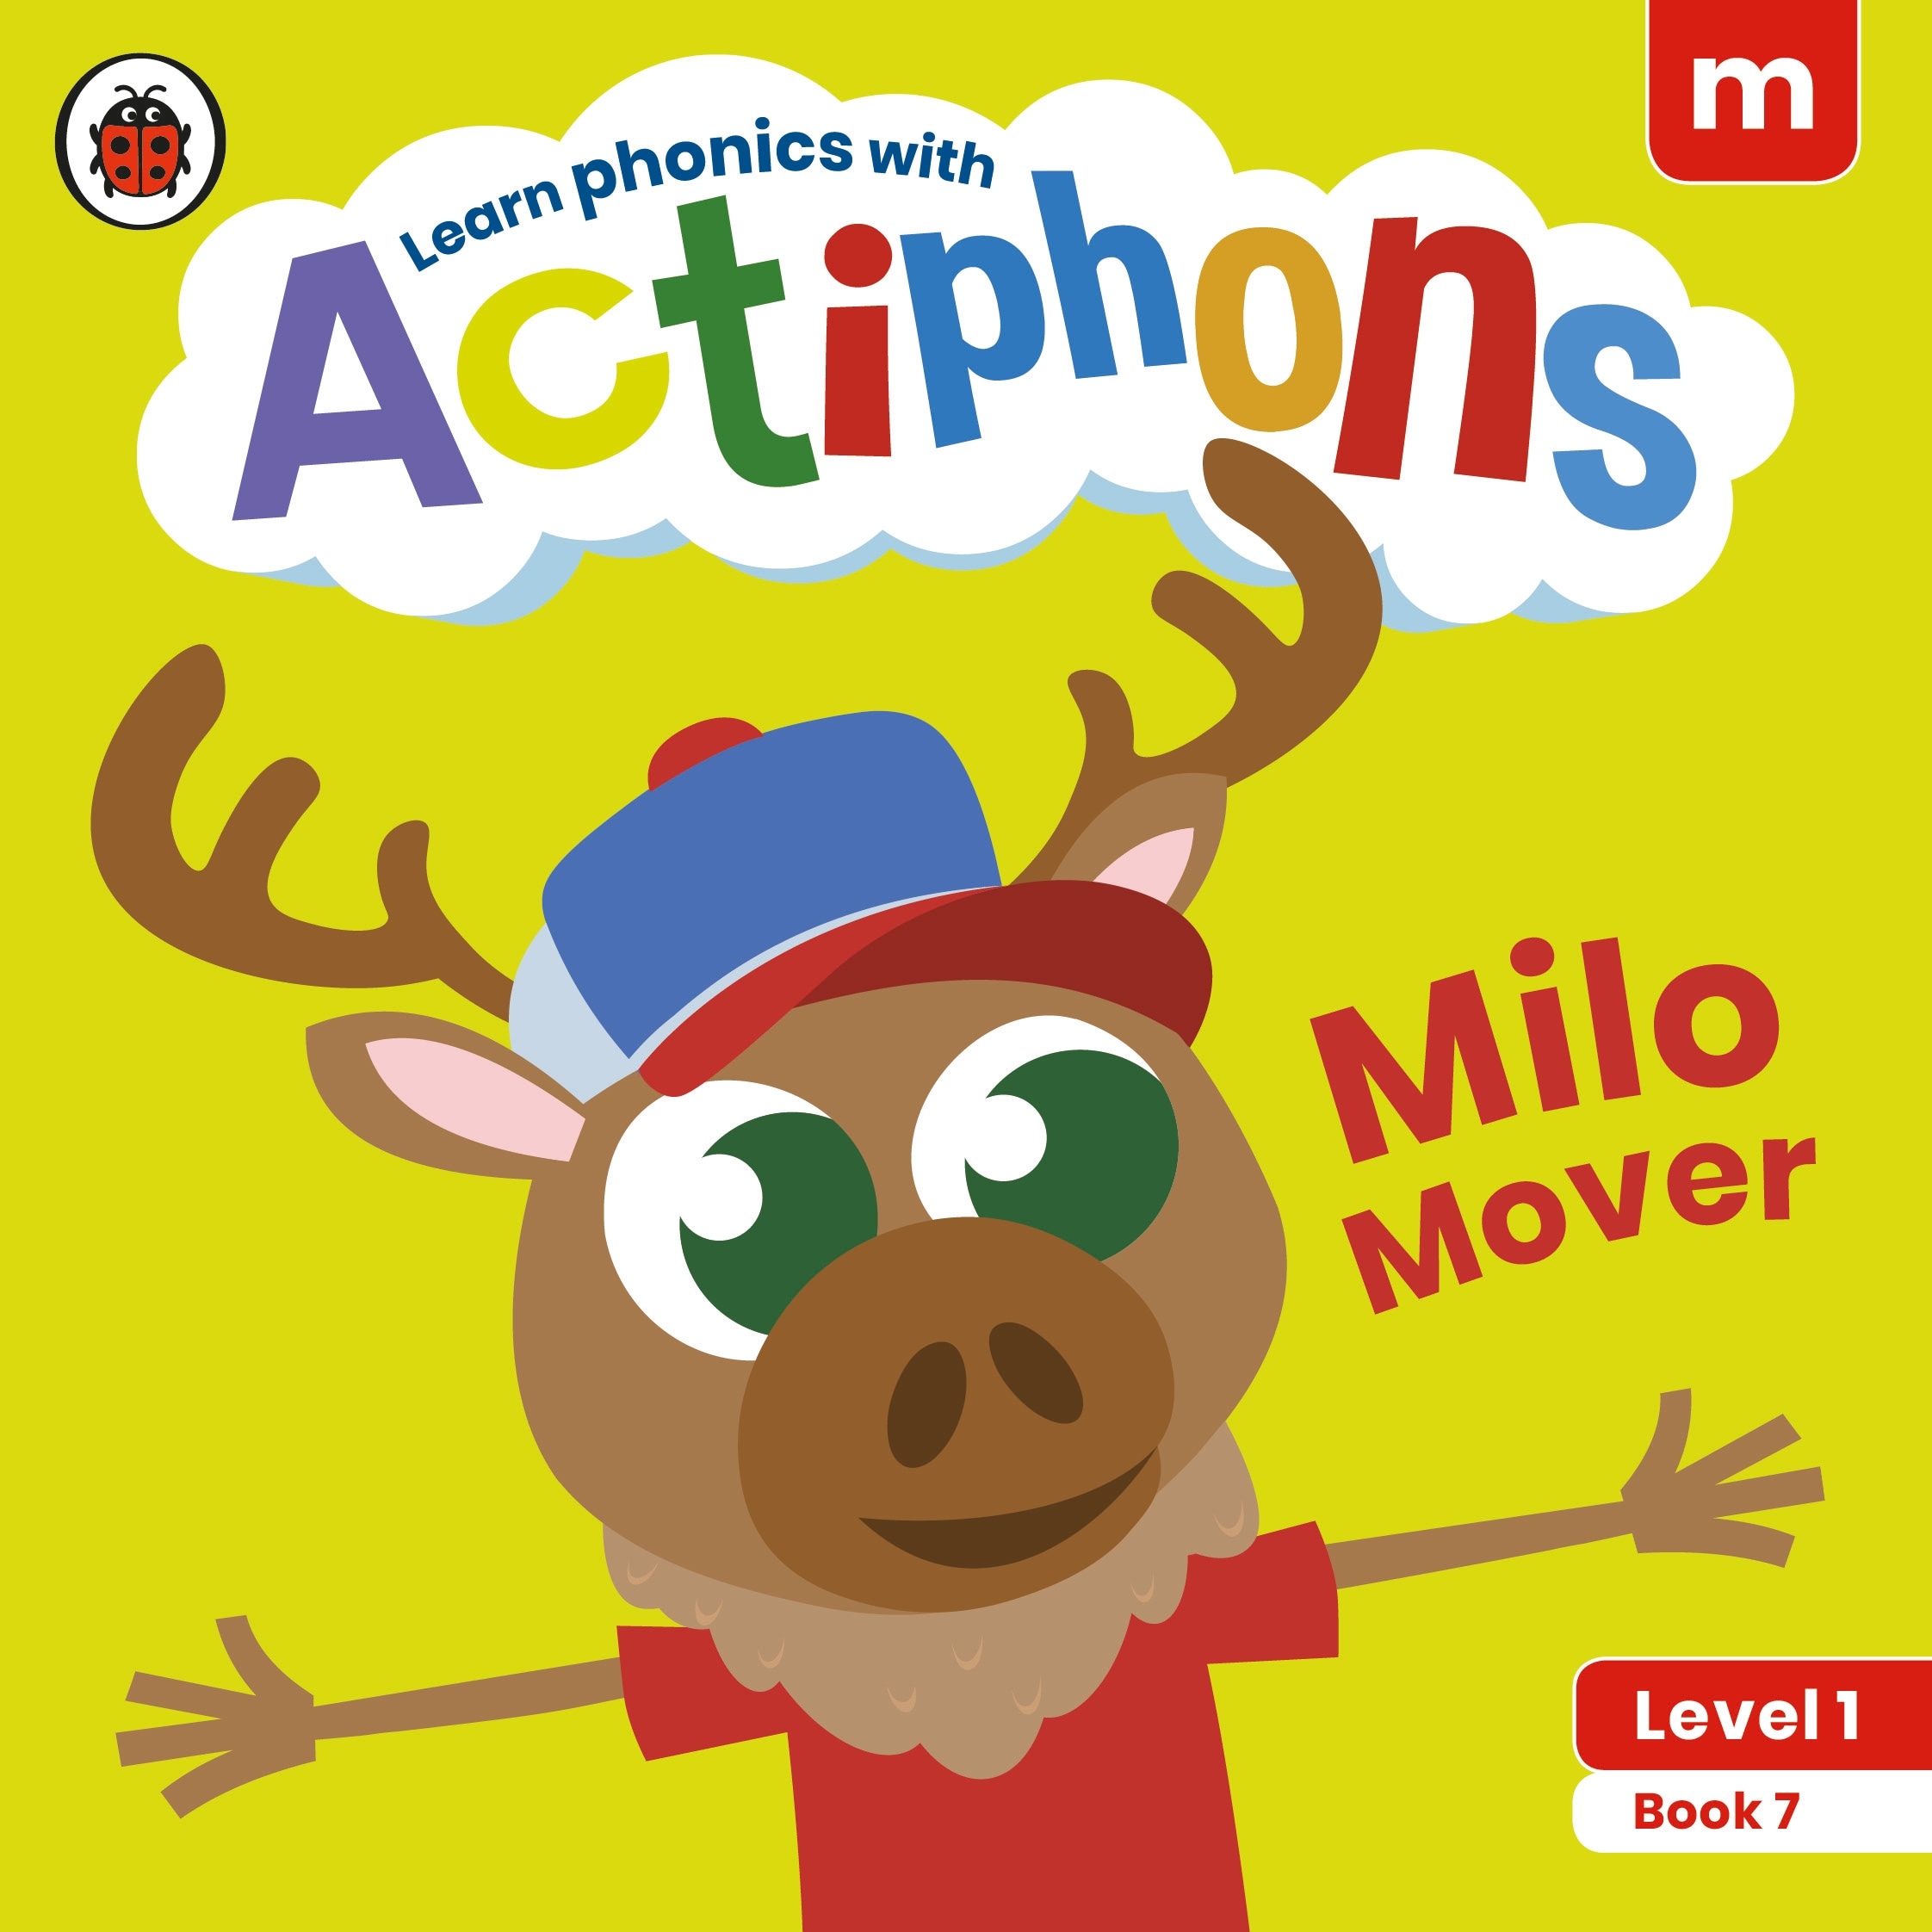 Actiphons Level 1 Book 7 Milo Mover